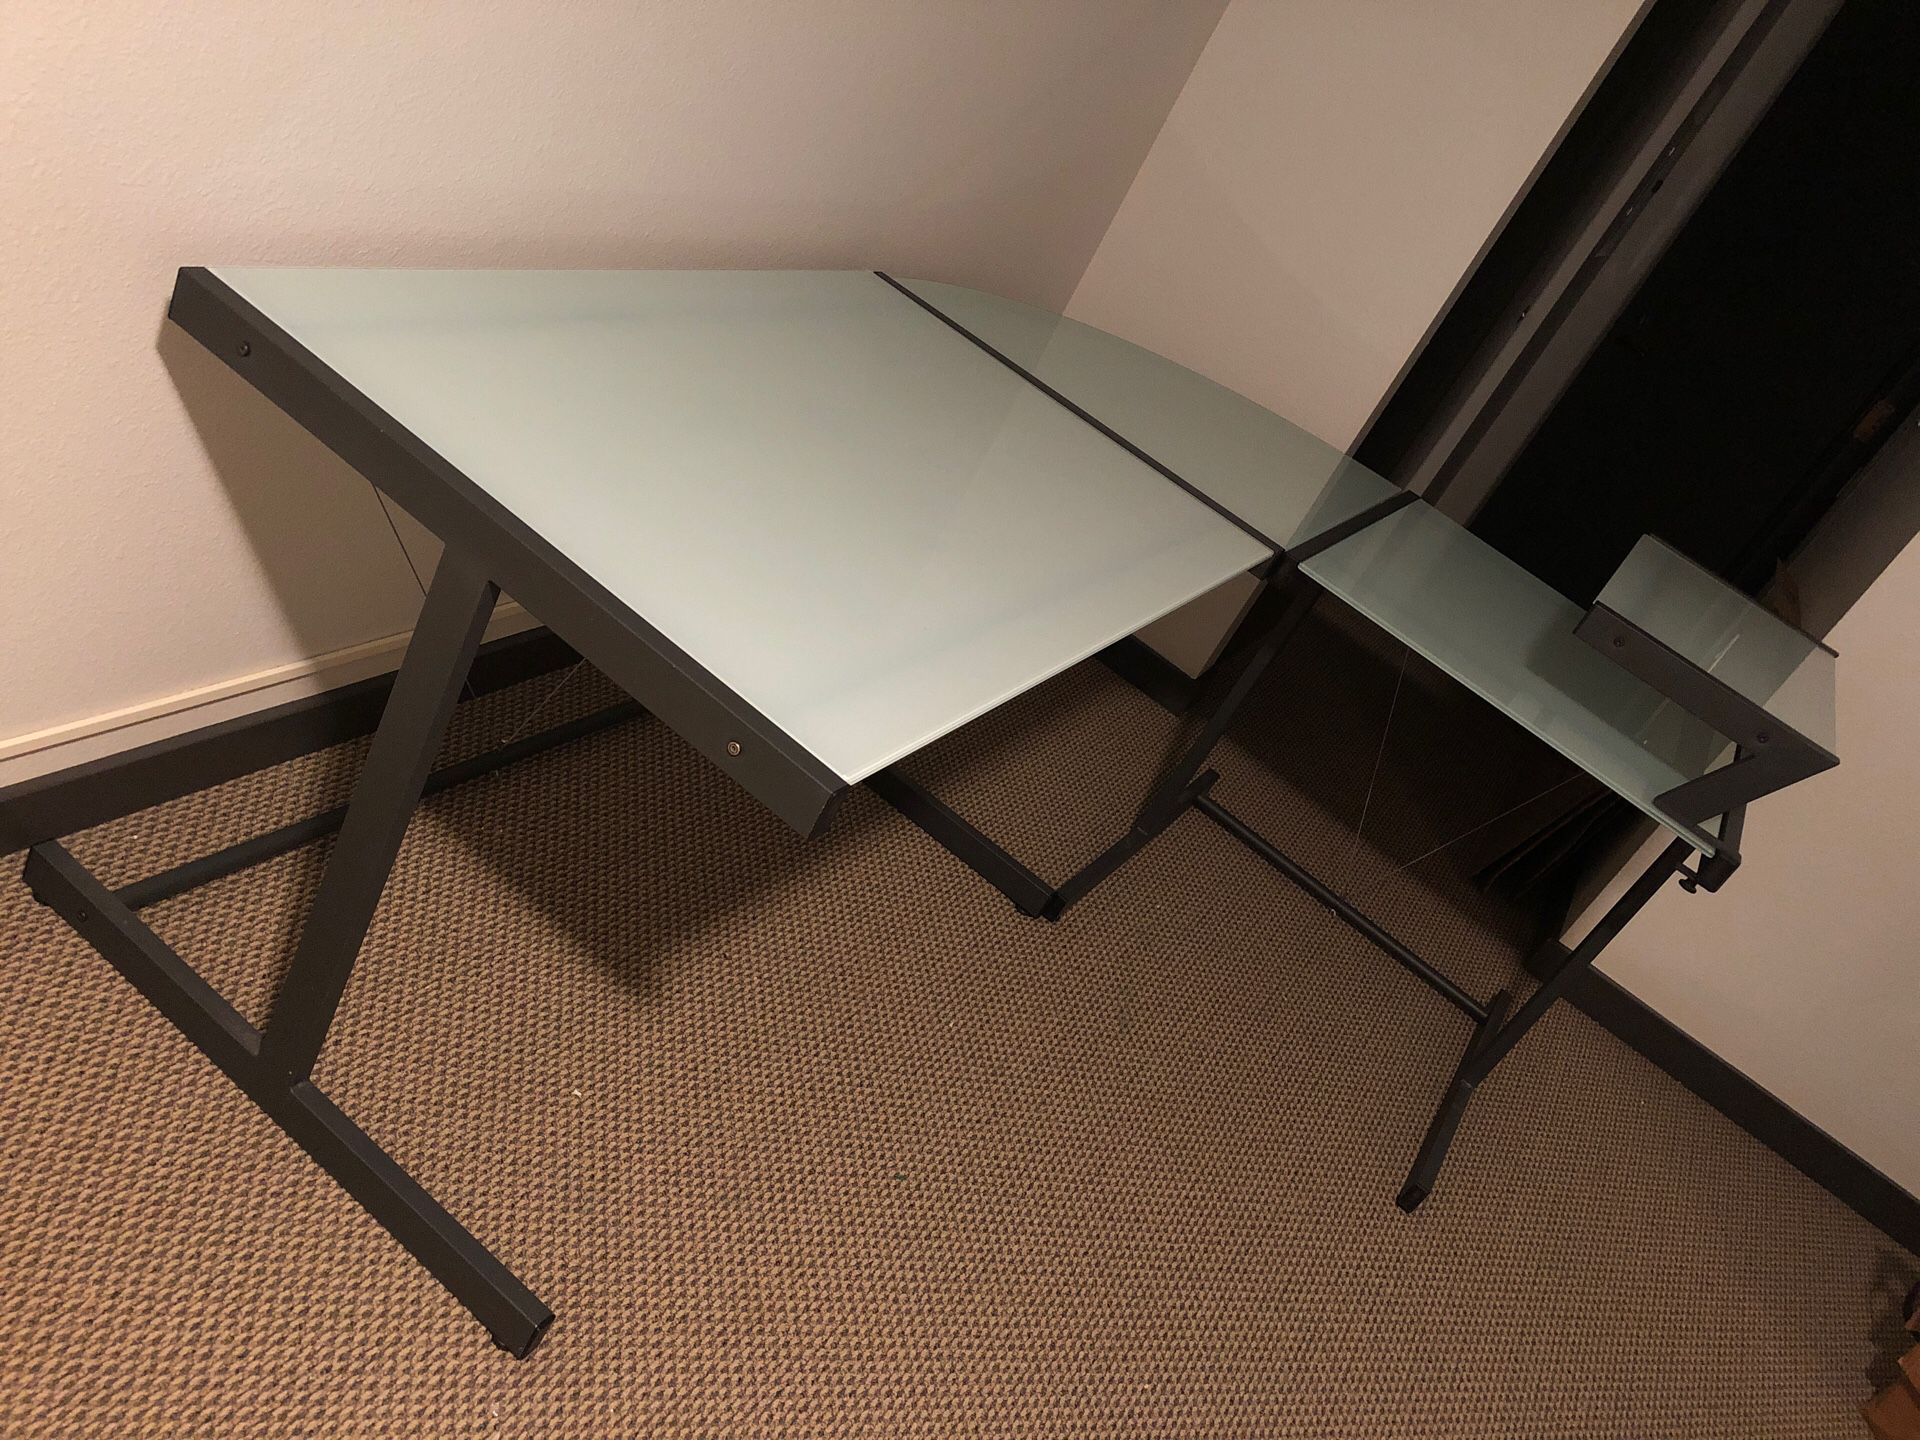 L-shaped glass table with a shelf